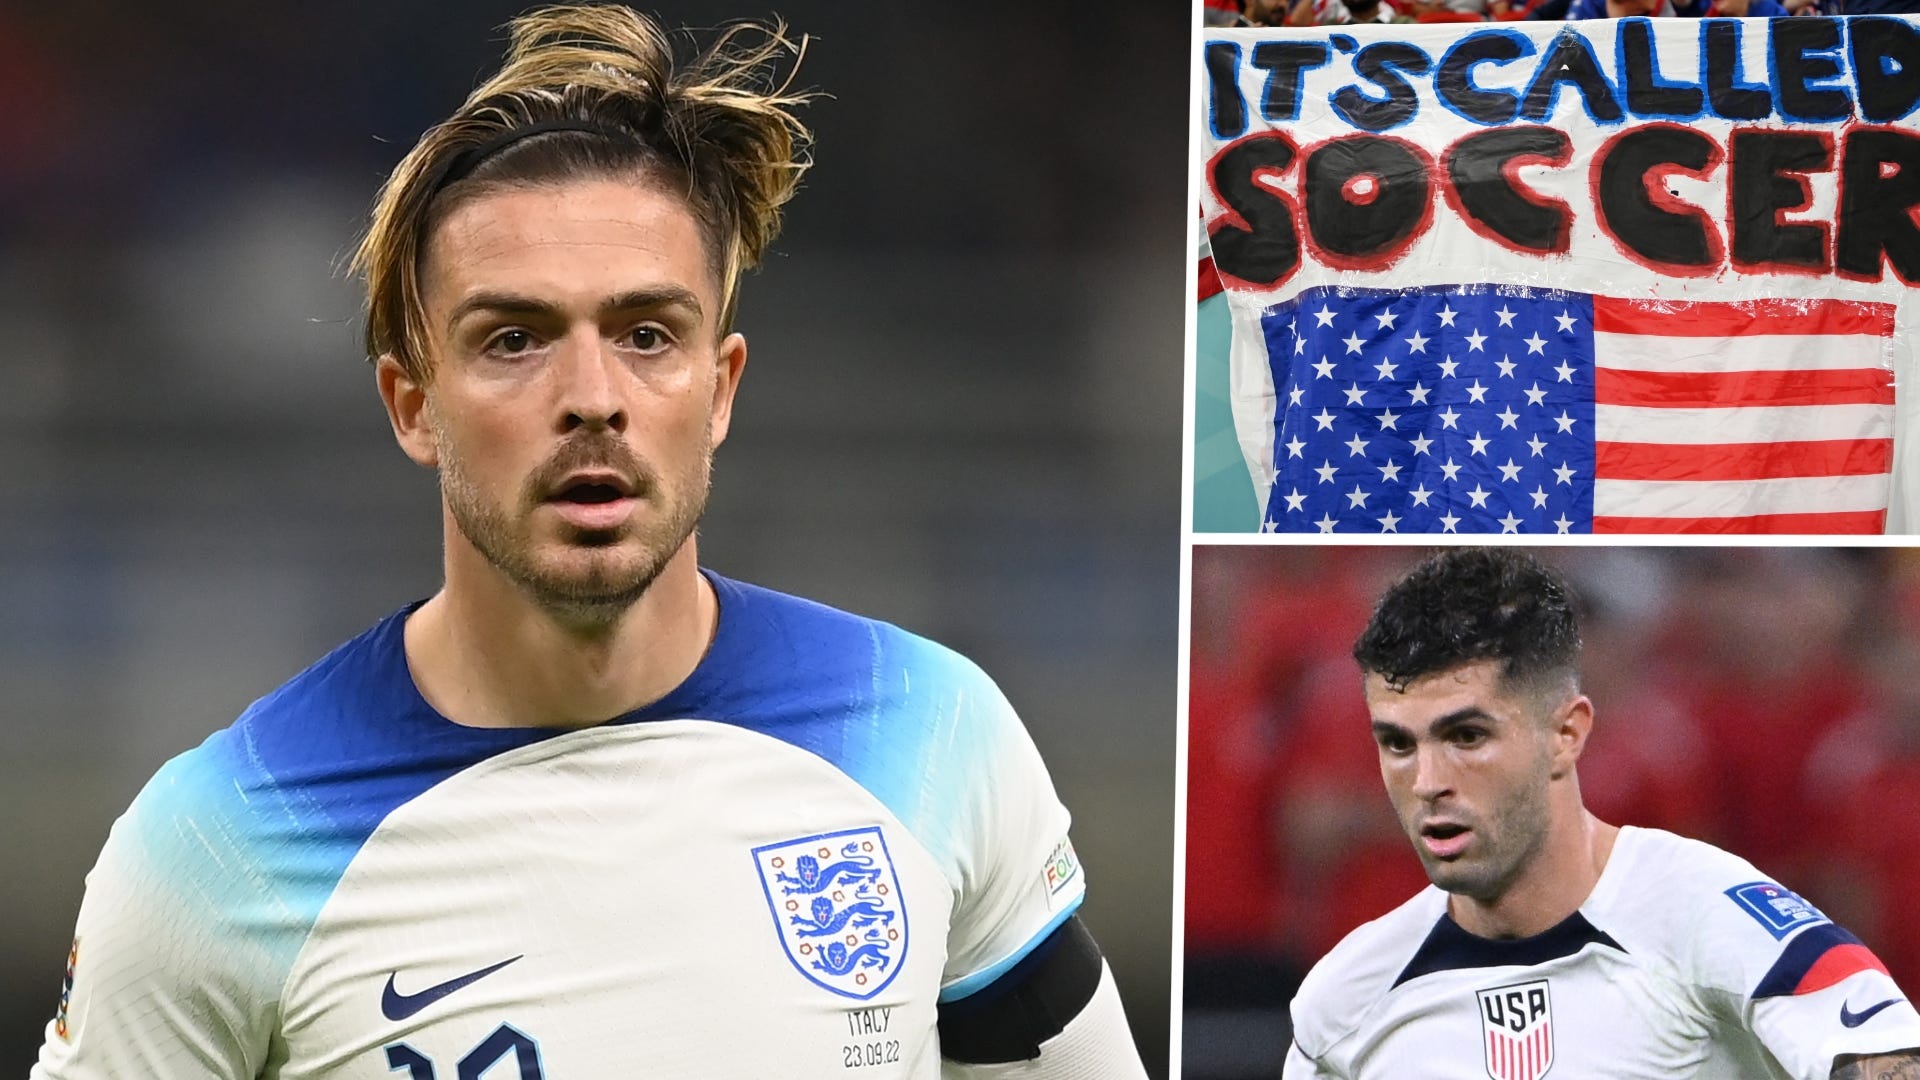 Jack Grealish England USMNT 'It's Called Soccer' banner Christian Pulisic World Cup 2022